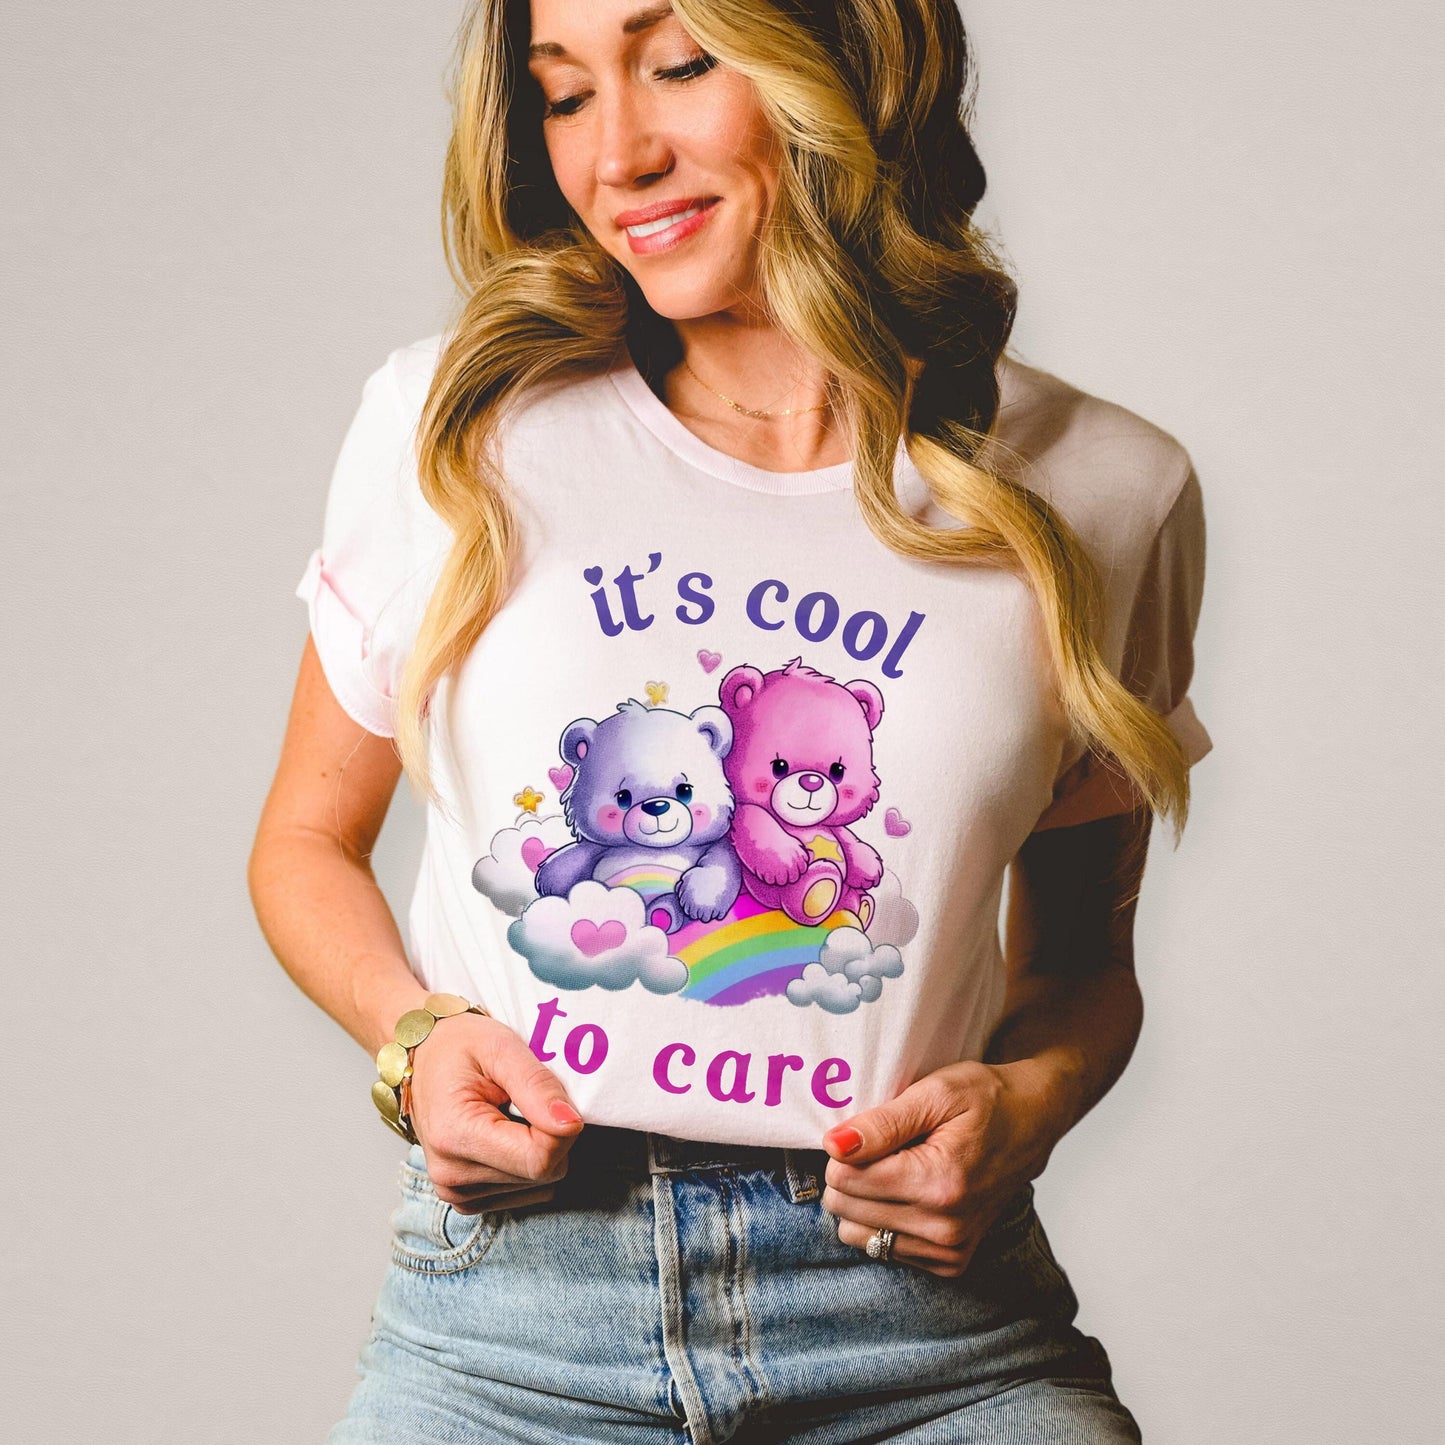 It's Cool To Care Illustrated Bears that Care 80s 1980s Army Brat Nostalgia AI Generated Parody Tee Unisex Soft Tee T-shirt for Women or Men